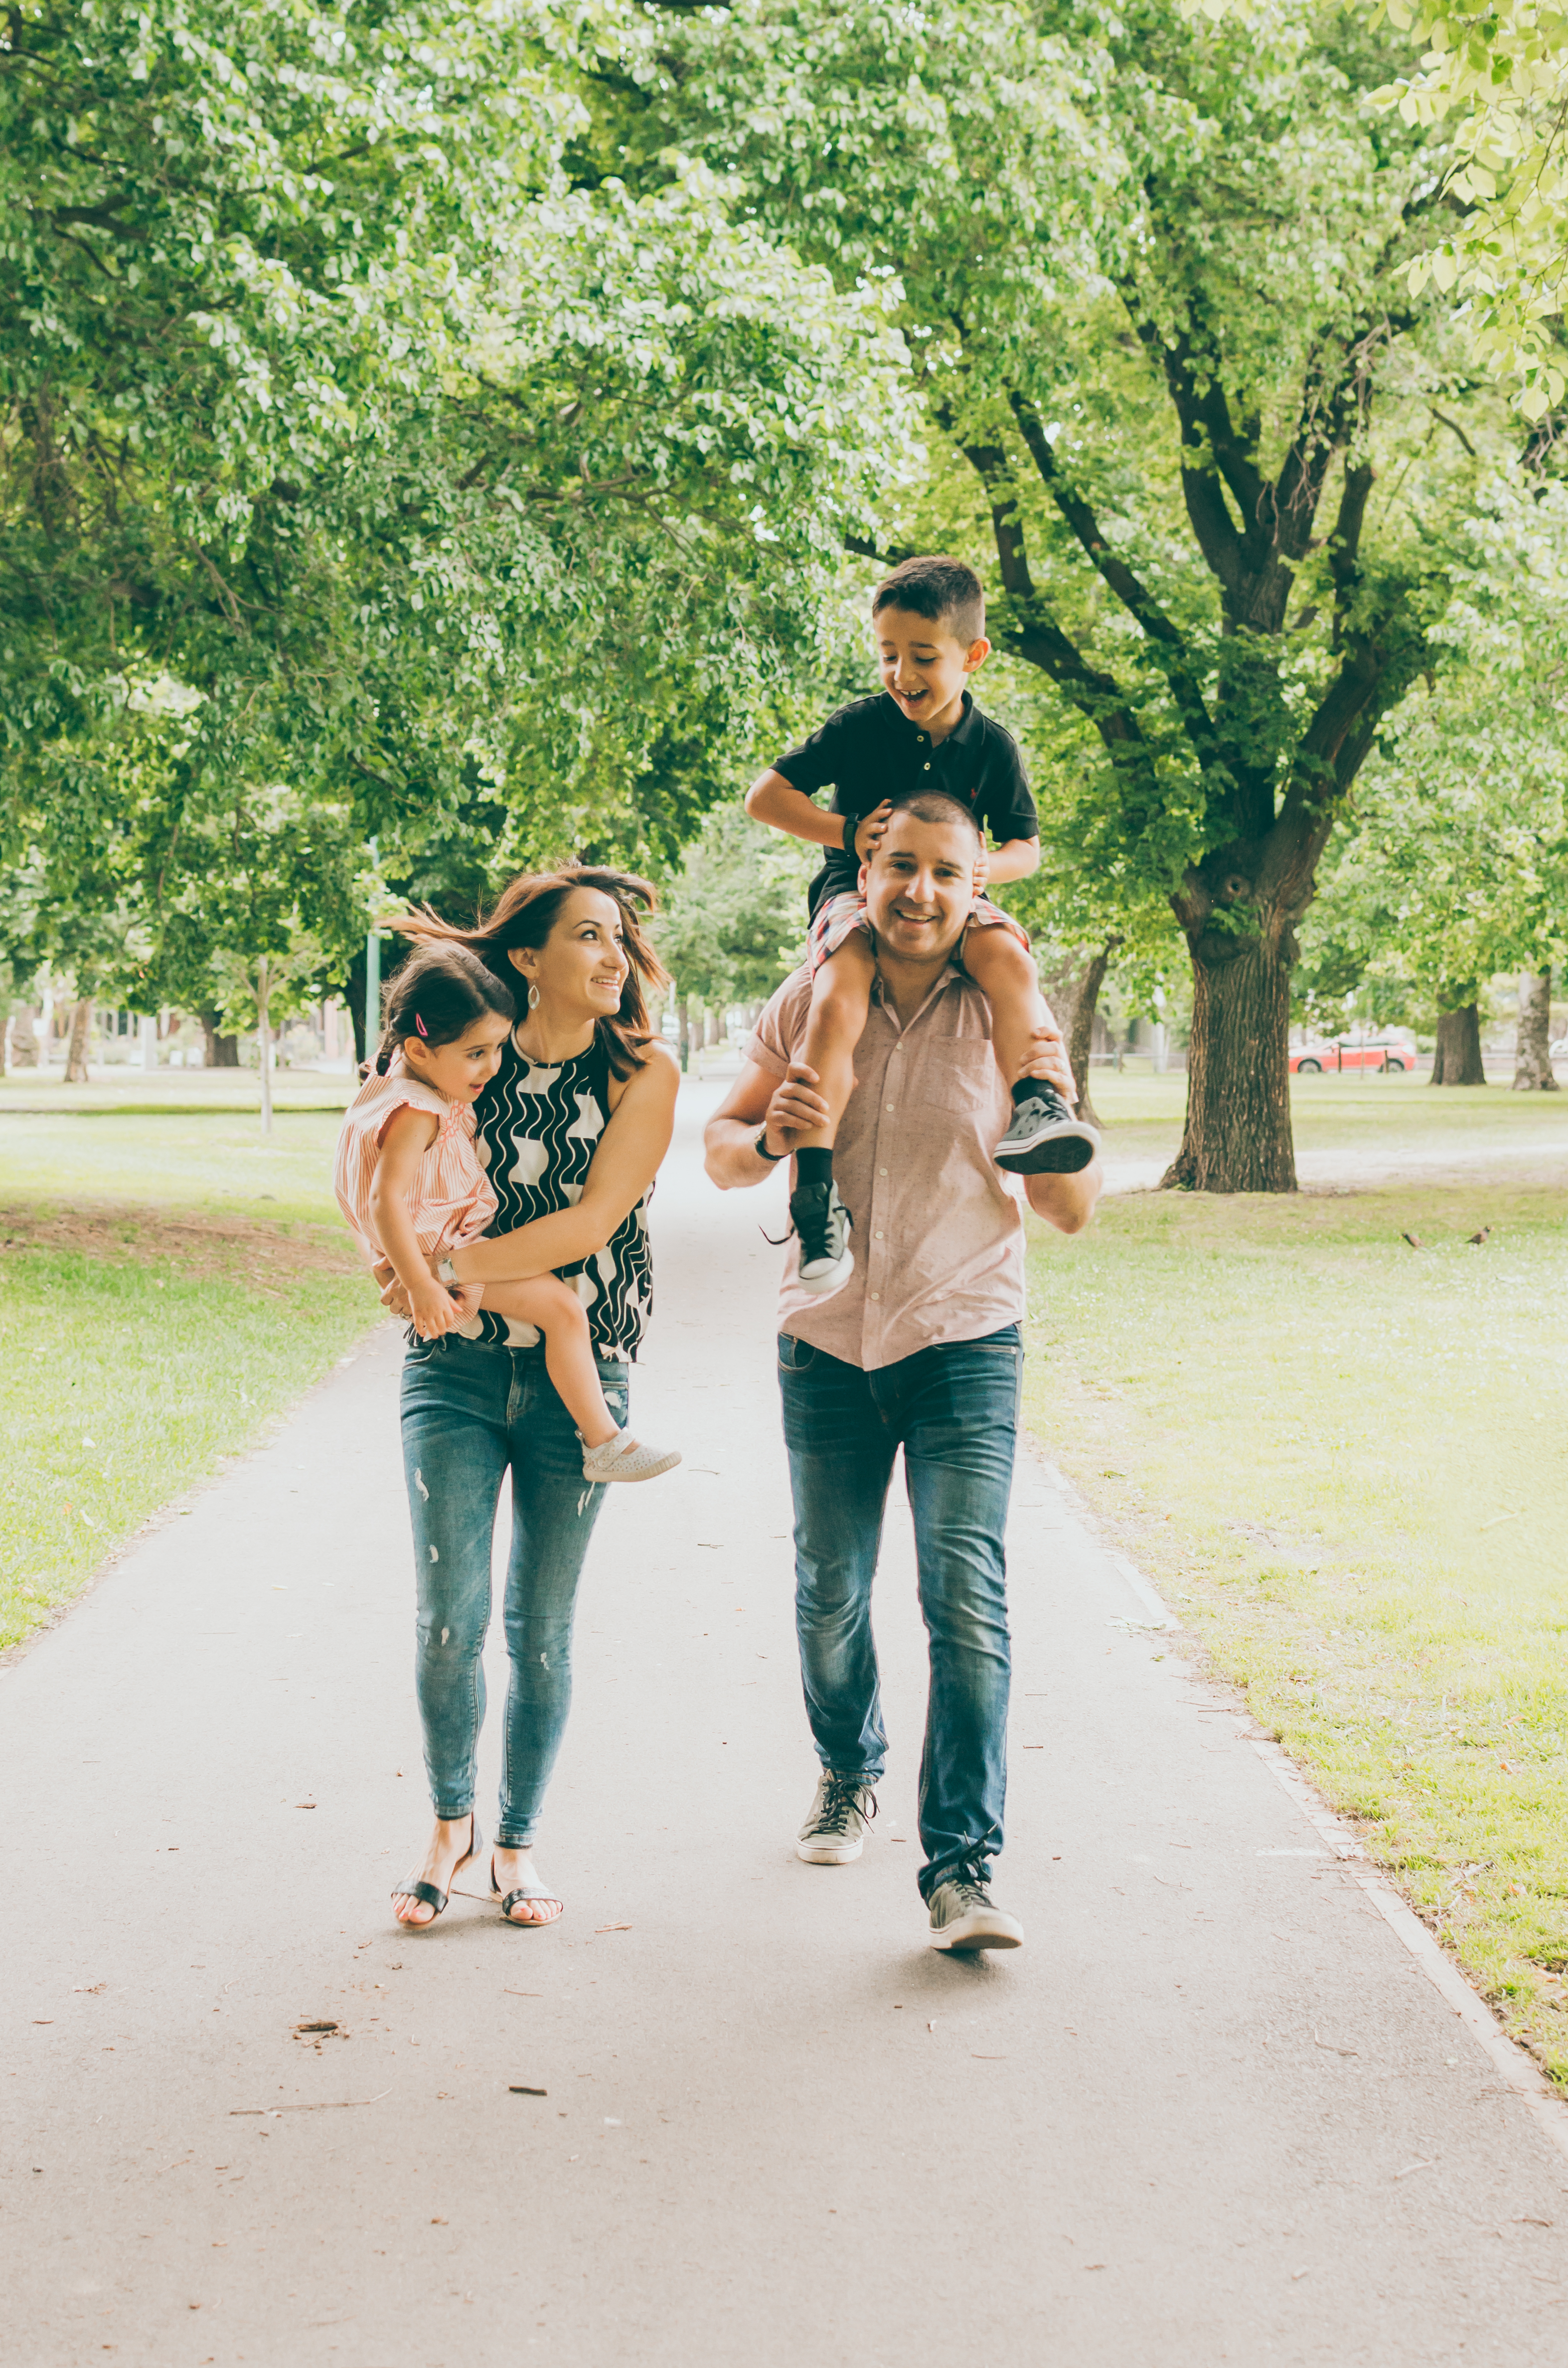 Lifestyle photographer Liyat G Haile documents and captures a happy family walking on tree-lined path, smiling, interacting and connecting at Princes Park, Melbourne, Australia